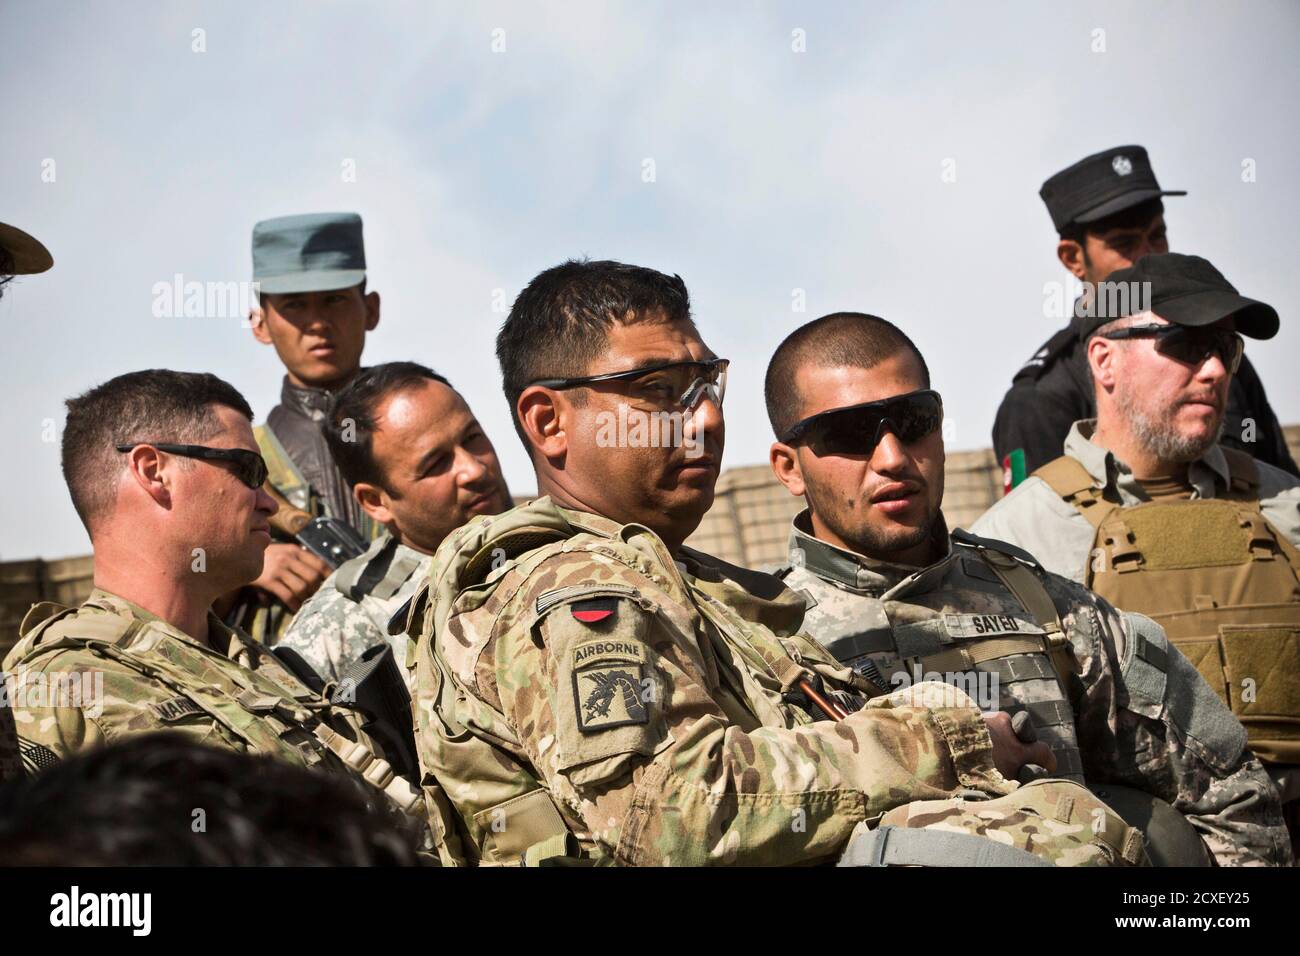 U.S. troops and members of the Afghan National Security Forces (ANSF) listen to a speaker at a shura - a meeting between village elders, U.S. troops and ANSF - near Command Outpost AJK (short for Azim-Jan-Kariz, a near-by village) in Maiwand District, Kandahar Province, Afghanistan, January 26, 2013. REUTERS/Andrew Burton (AFGHANISTAN - Tags: POLITICS) Stock Photo